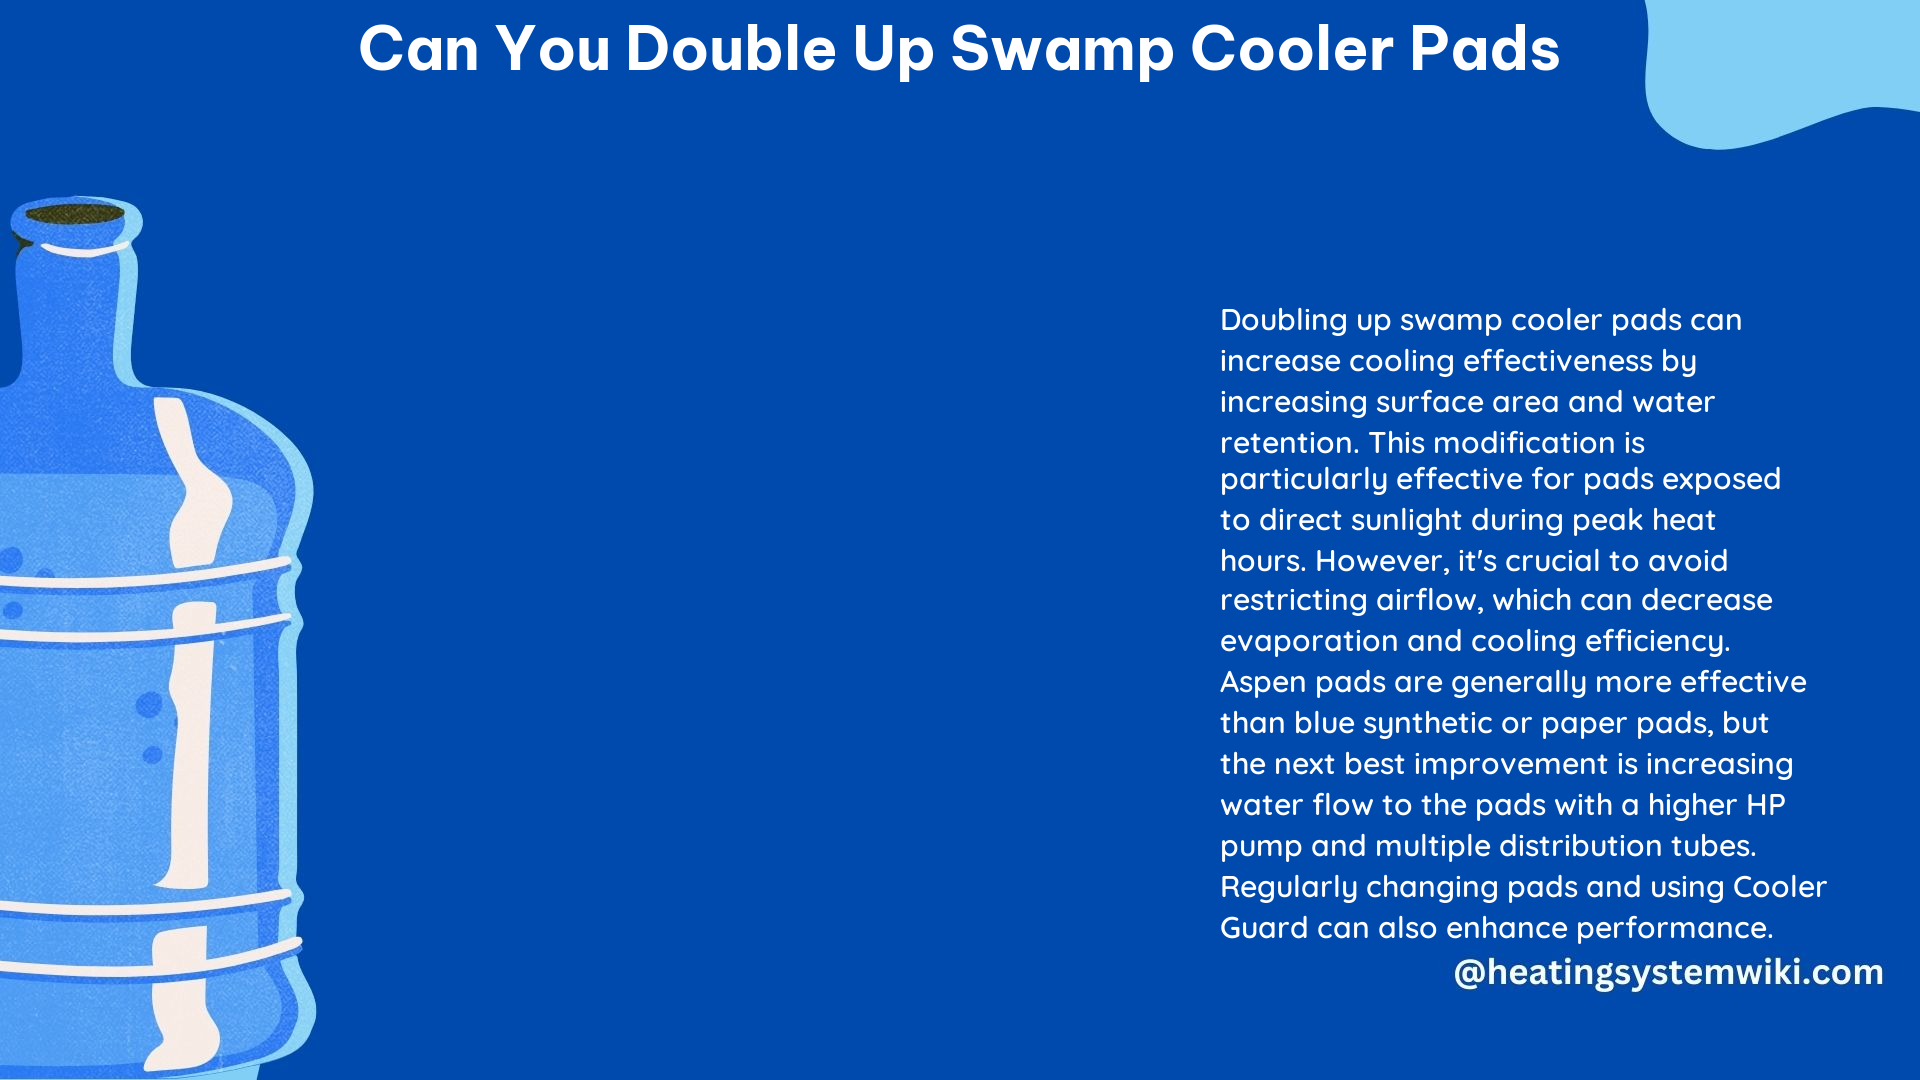 Can You Double up Swamp Cooler Pads